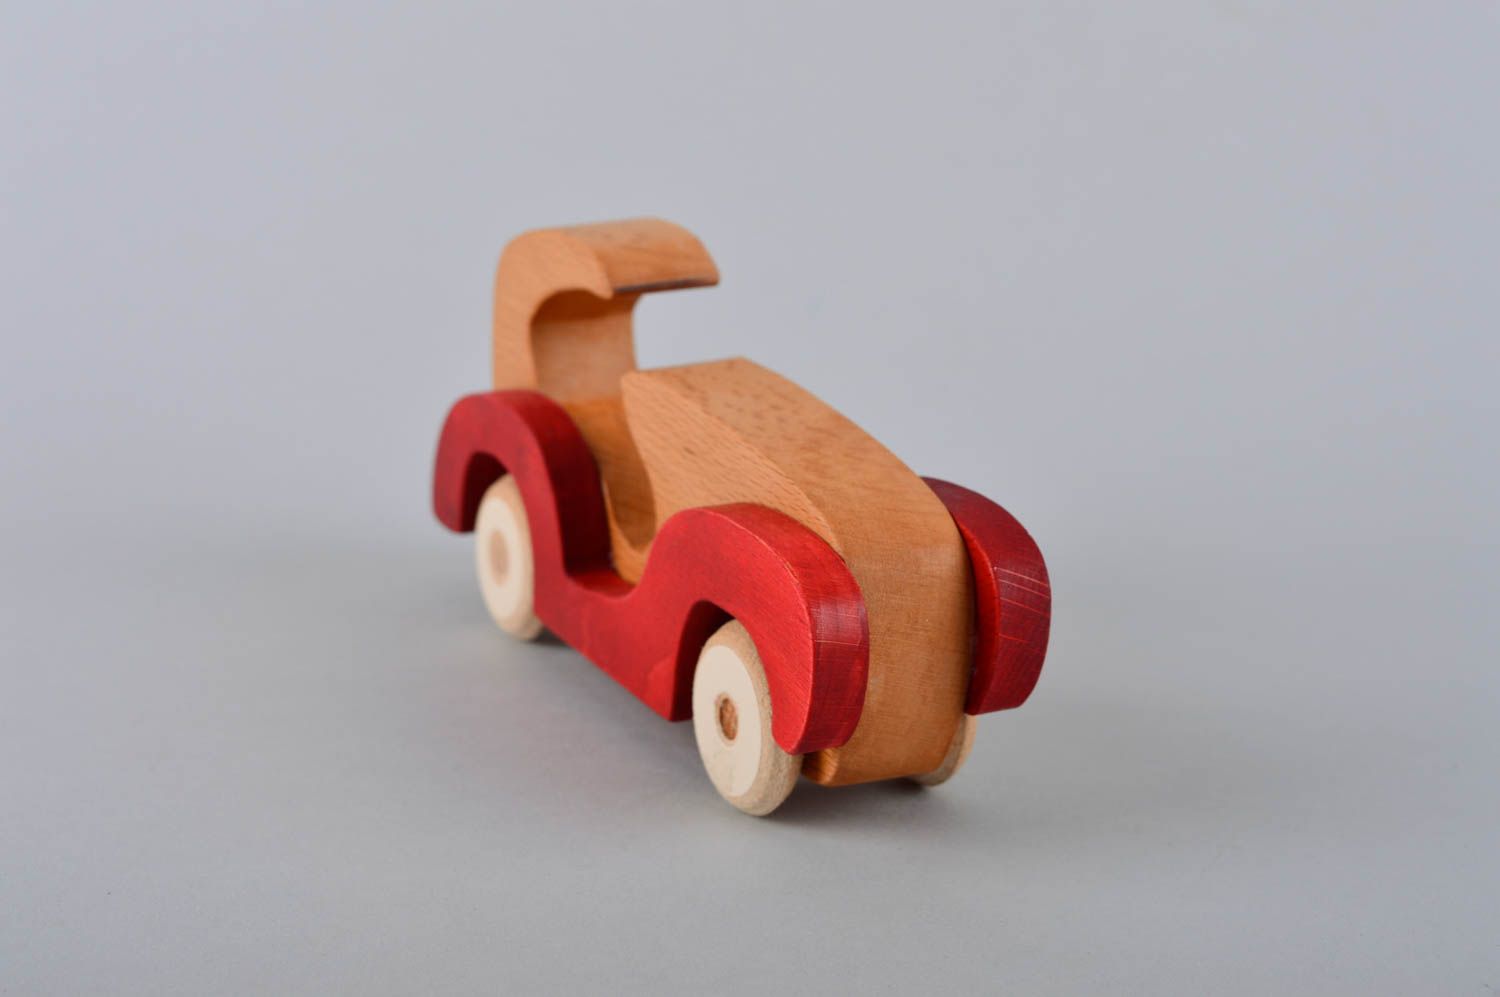 Handmade toy wooden toy for children nursery decor ideas gift for baby photo 3